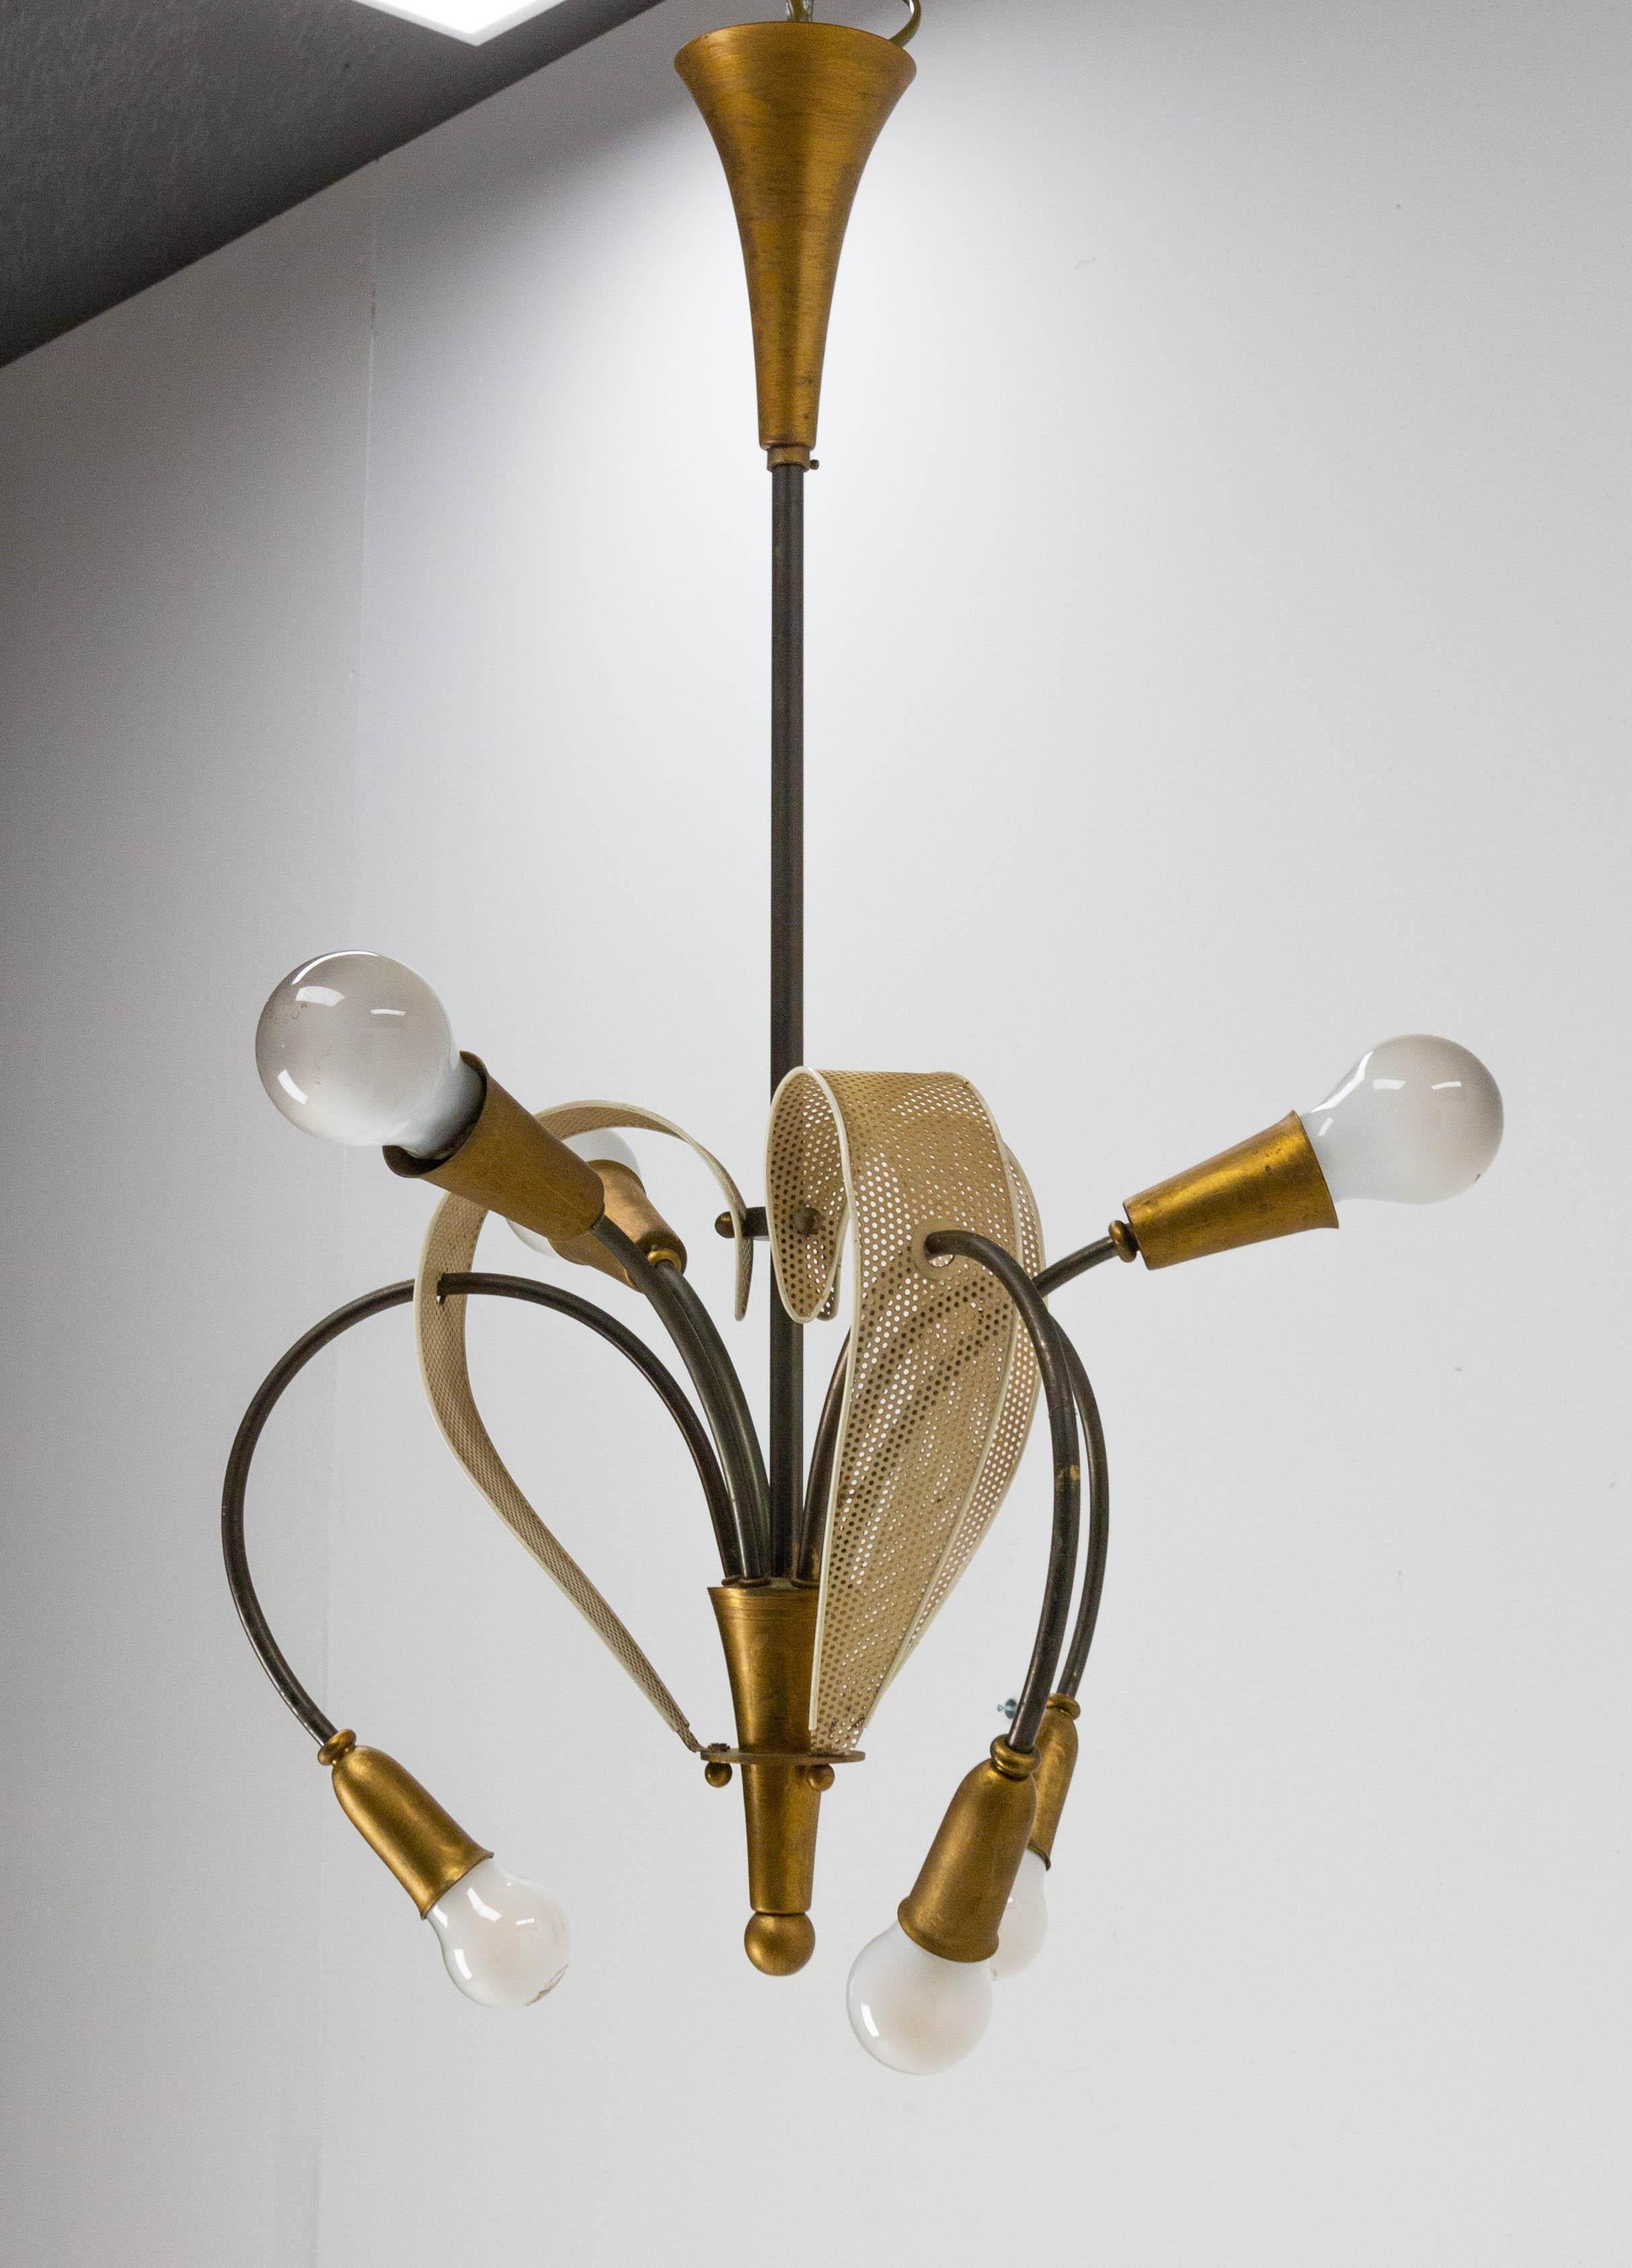 Brass French Chandelier Ceiling Pendant Lustre c. 1950 by Pierre Guariche for Disderot For Sale